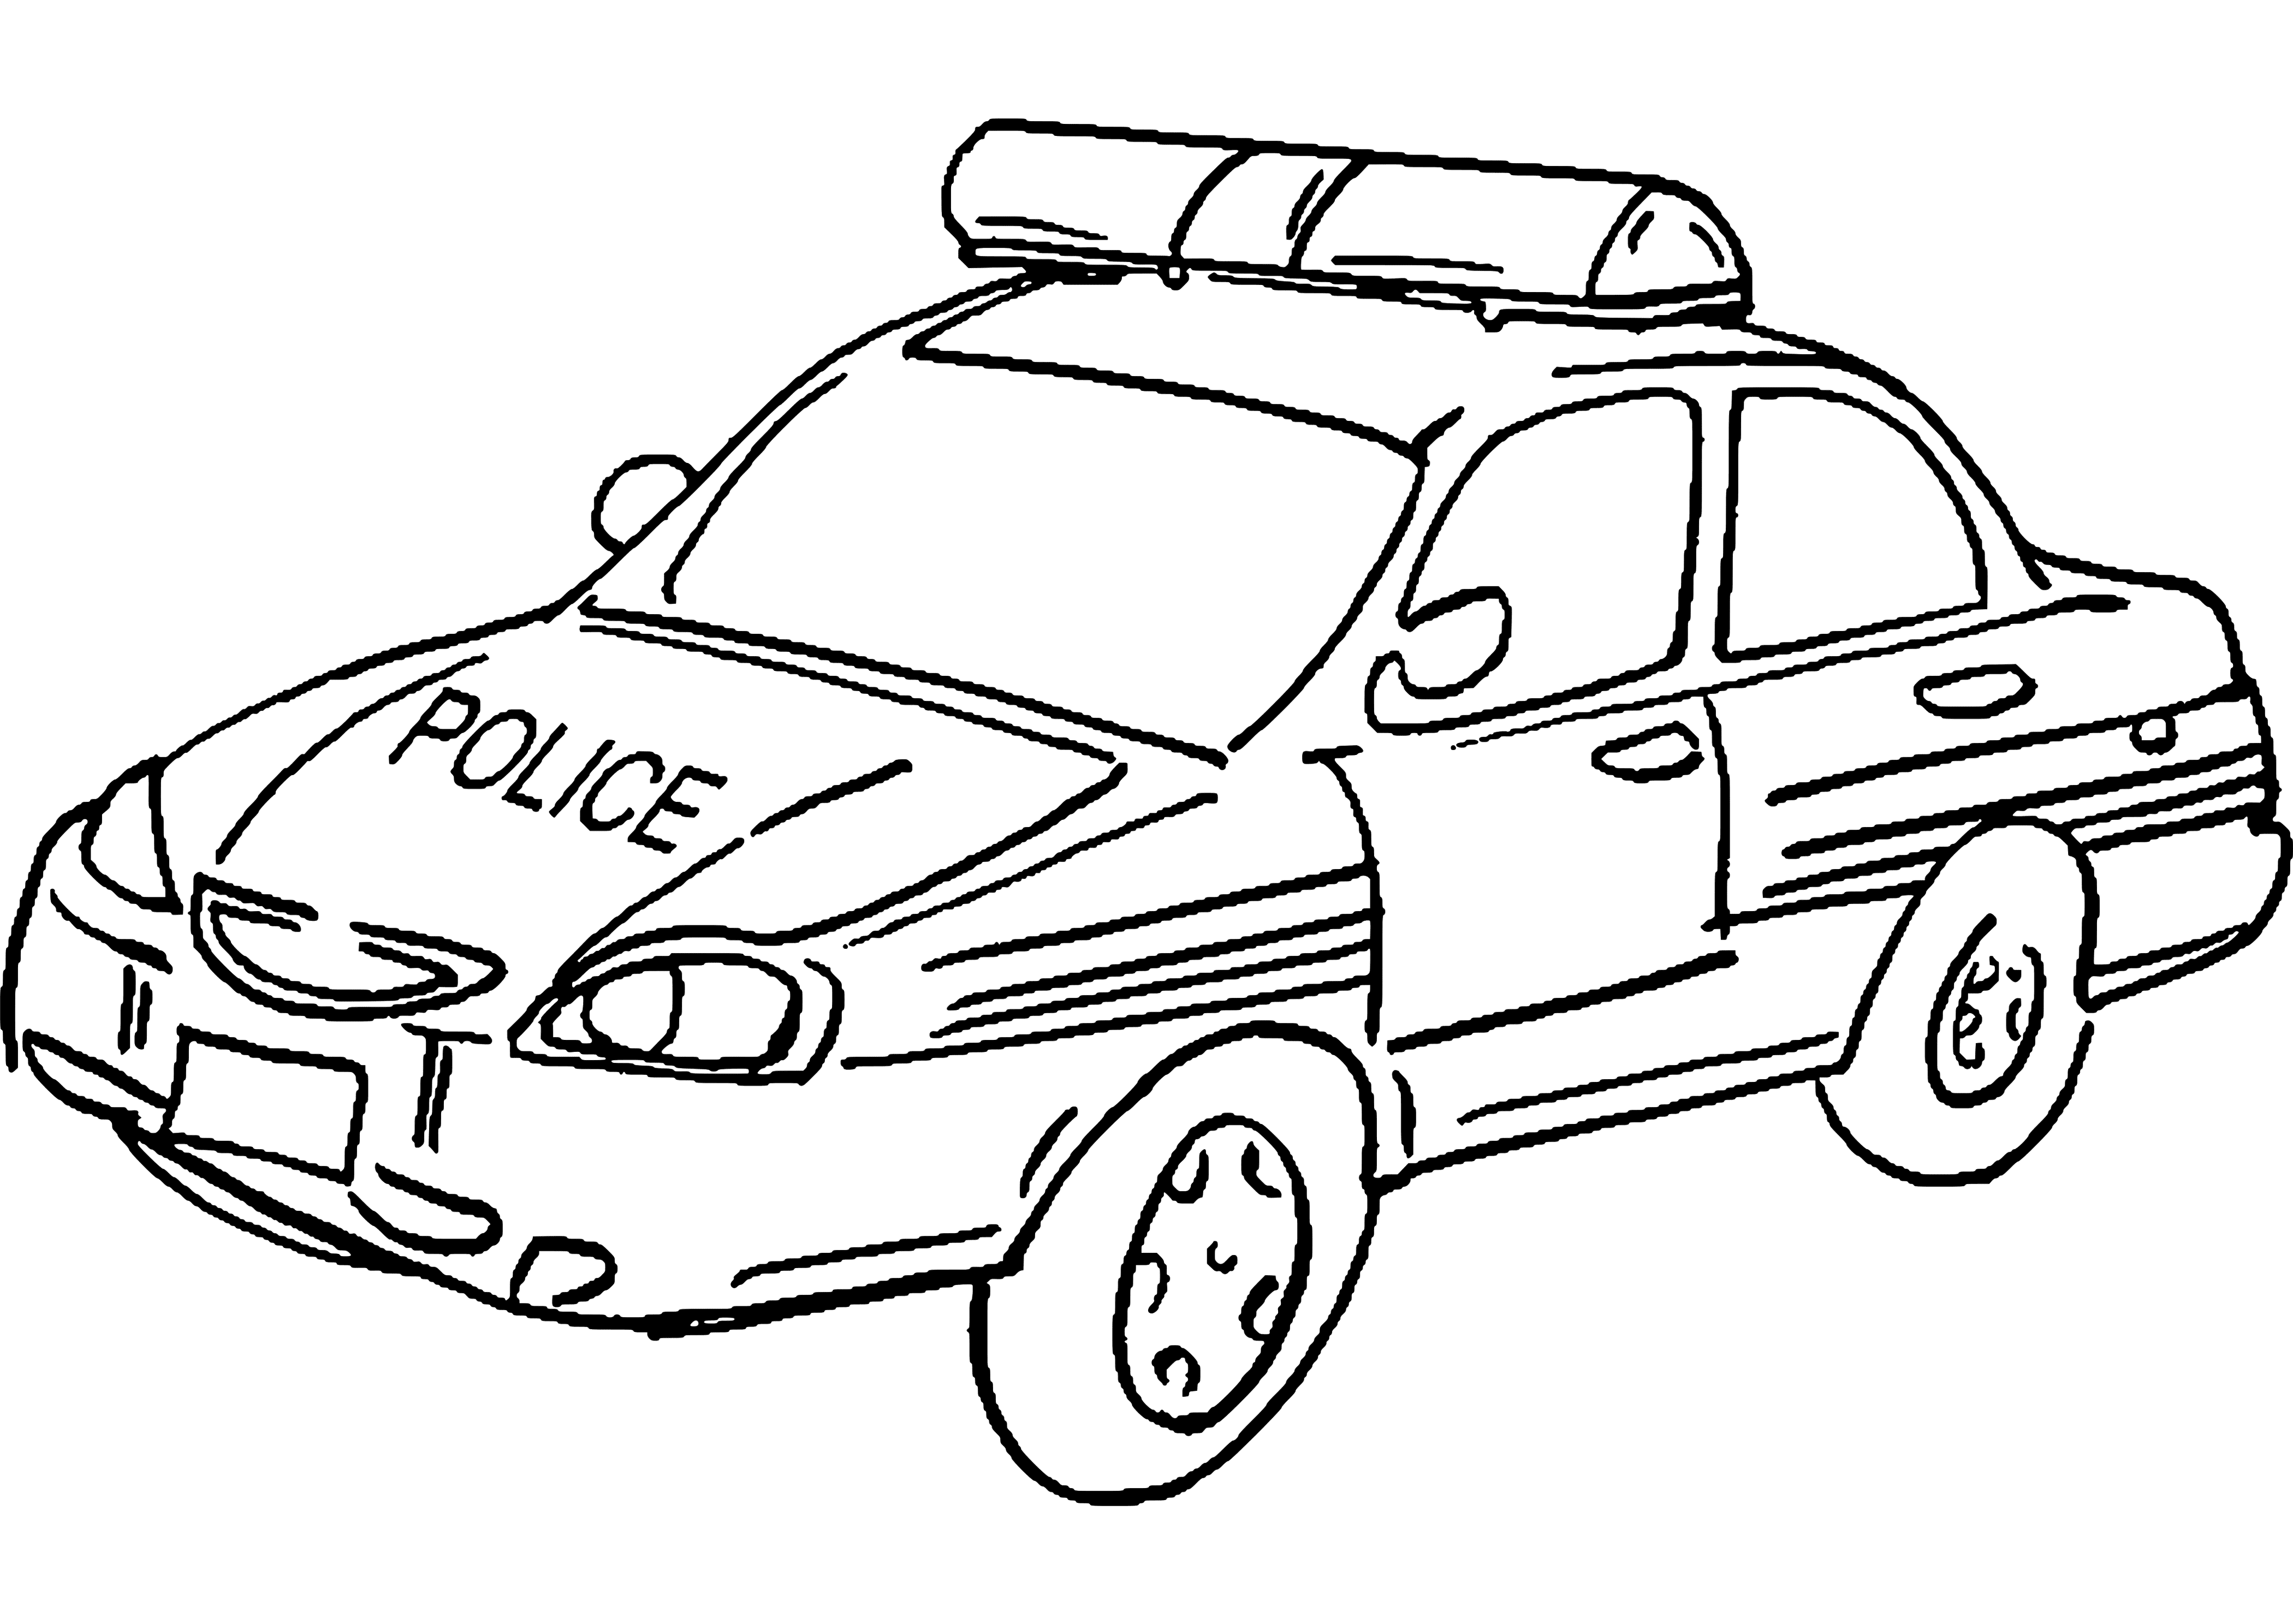 Drawing Police Car Coloring Page